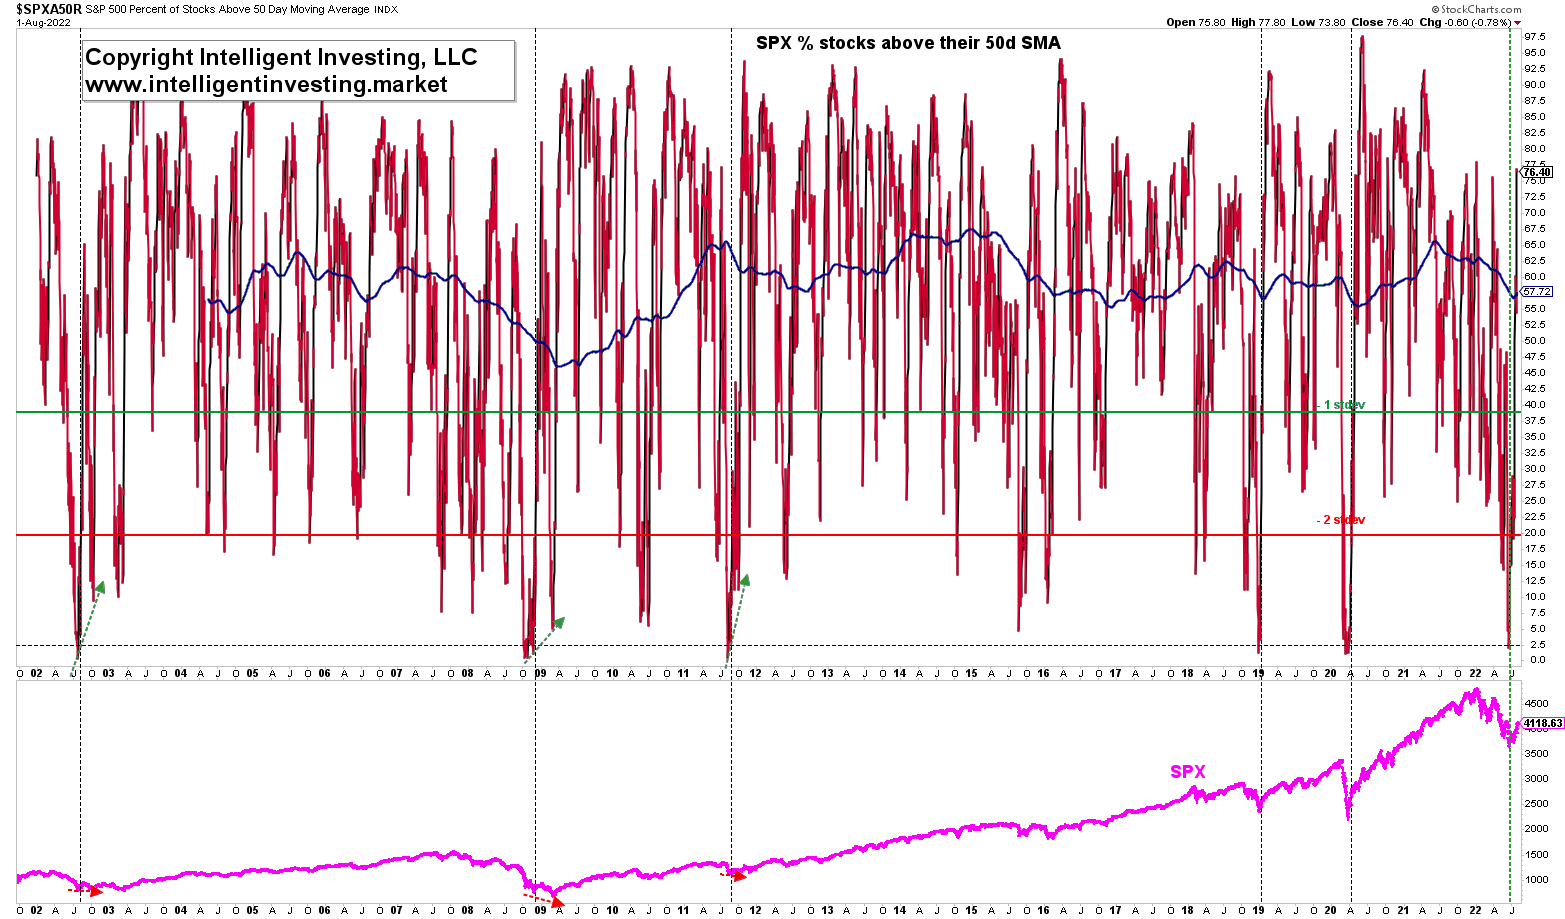 Stocks In The S&P 500 Trading Above Their 50-D SMA (Percentage)